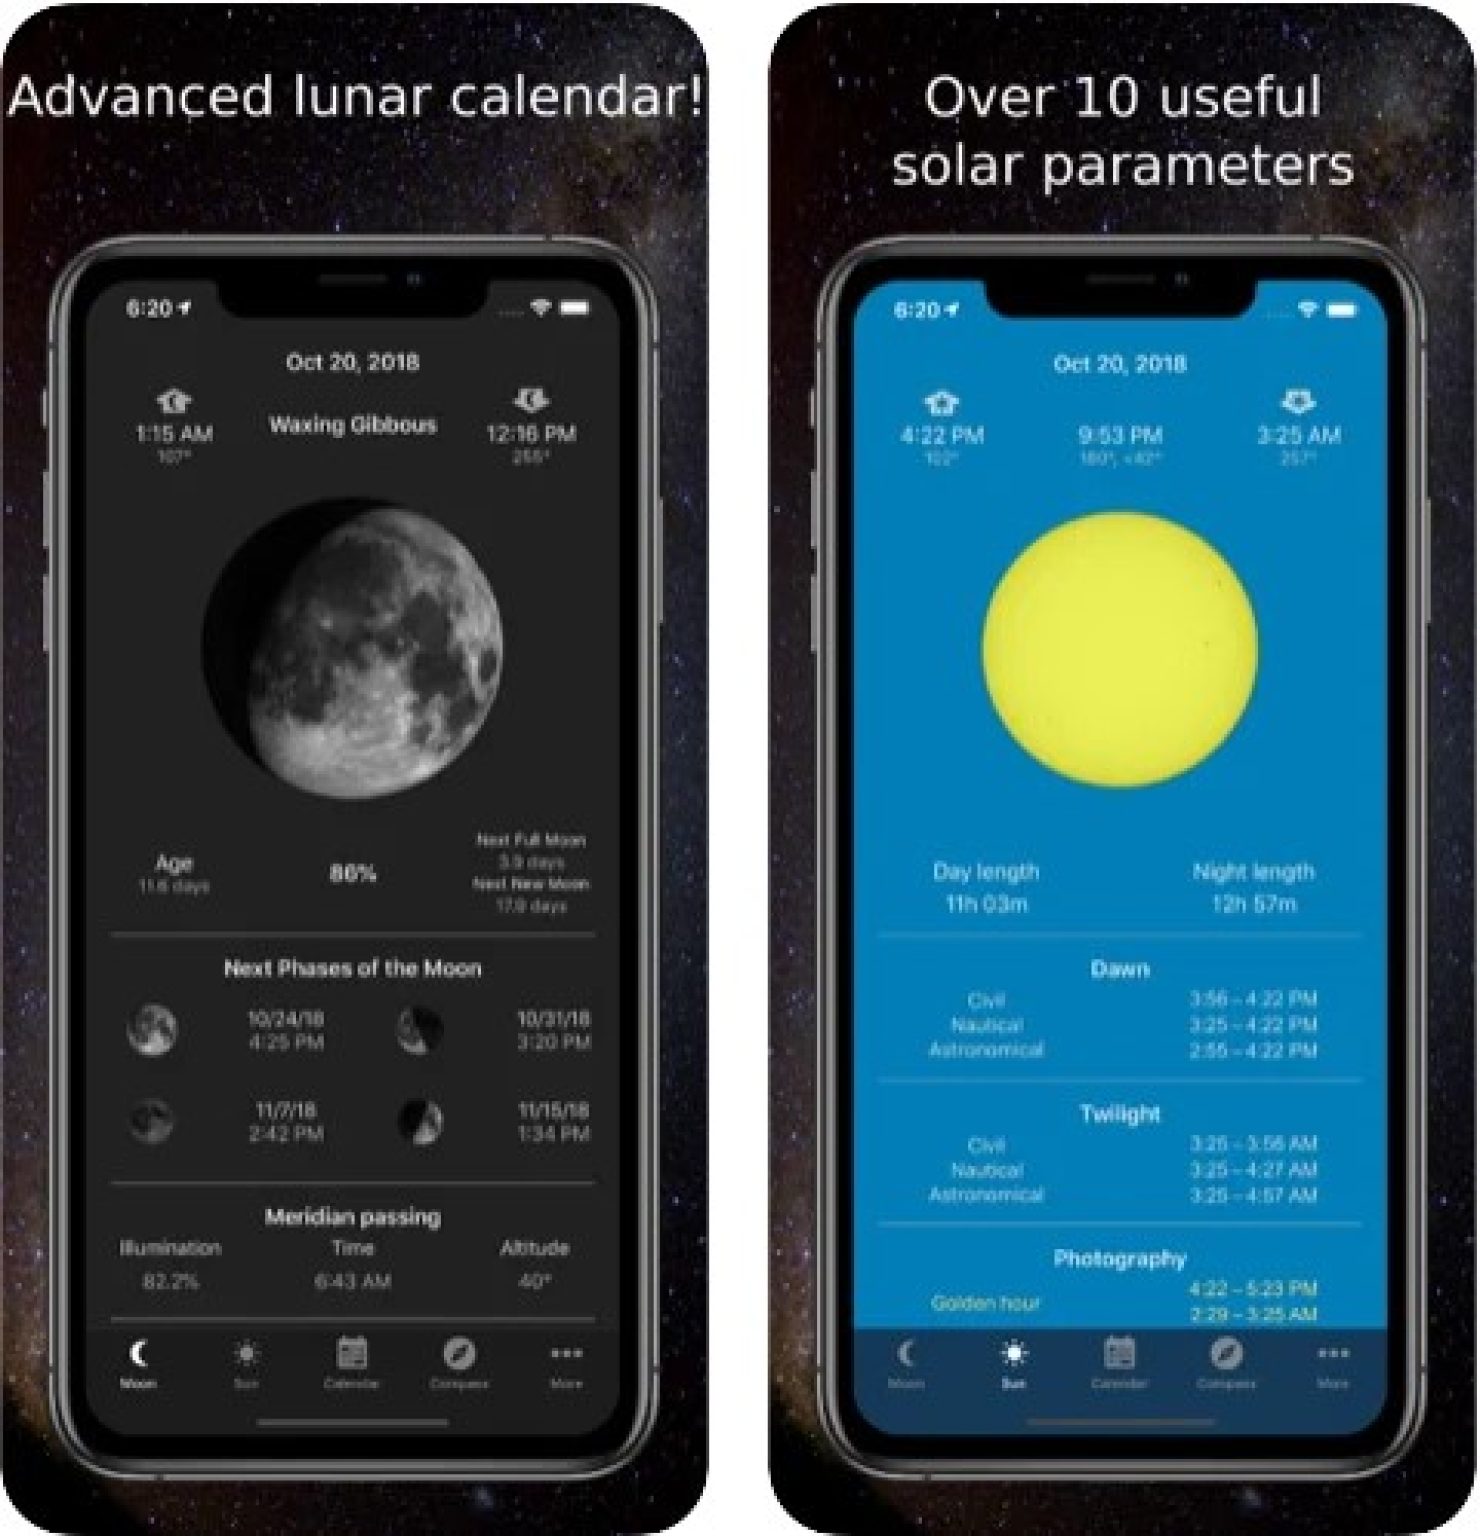 Moon Phase Calendar App Review Freeappsforme Free apps for Android